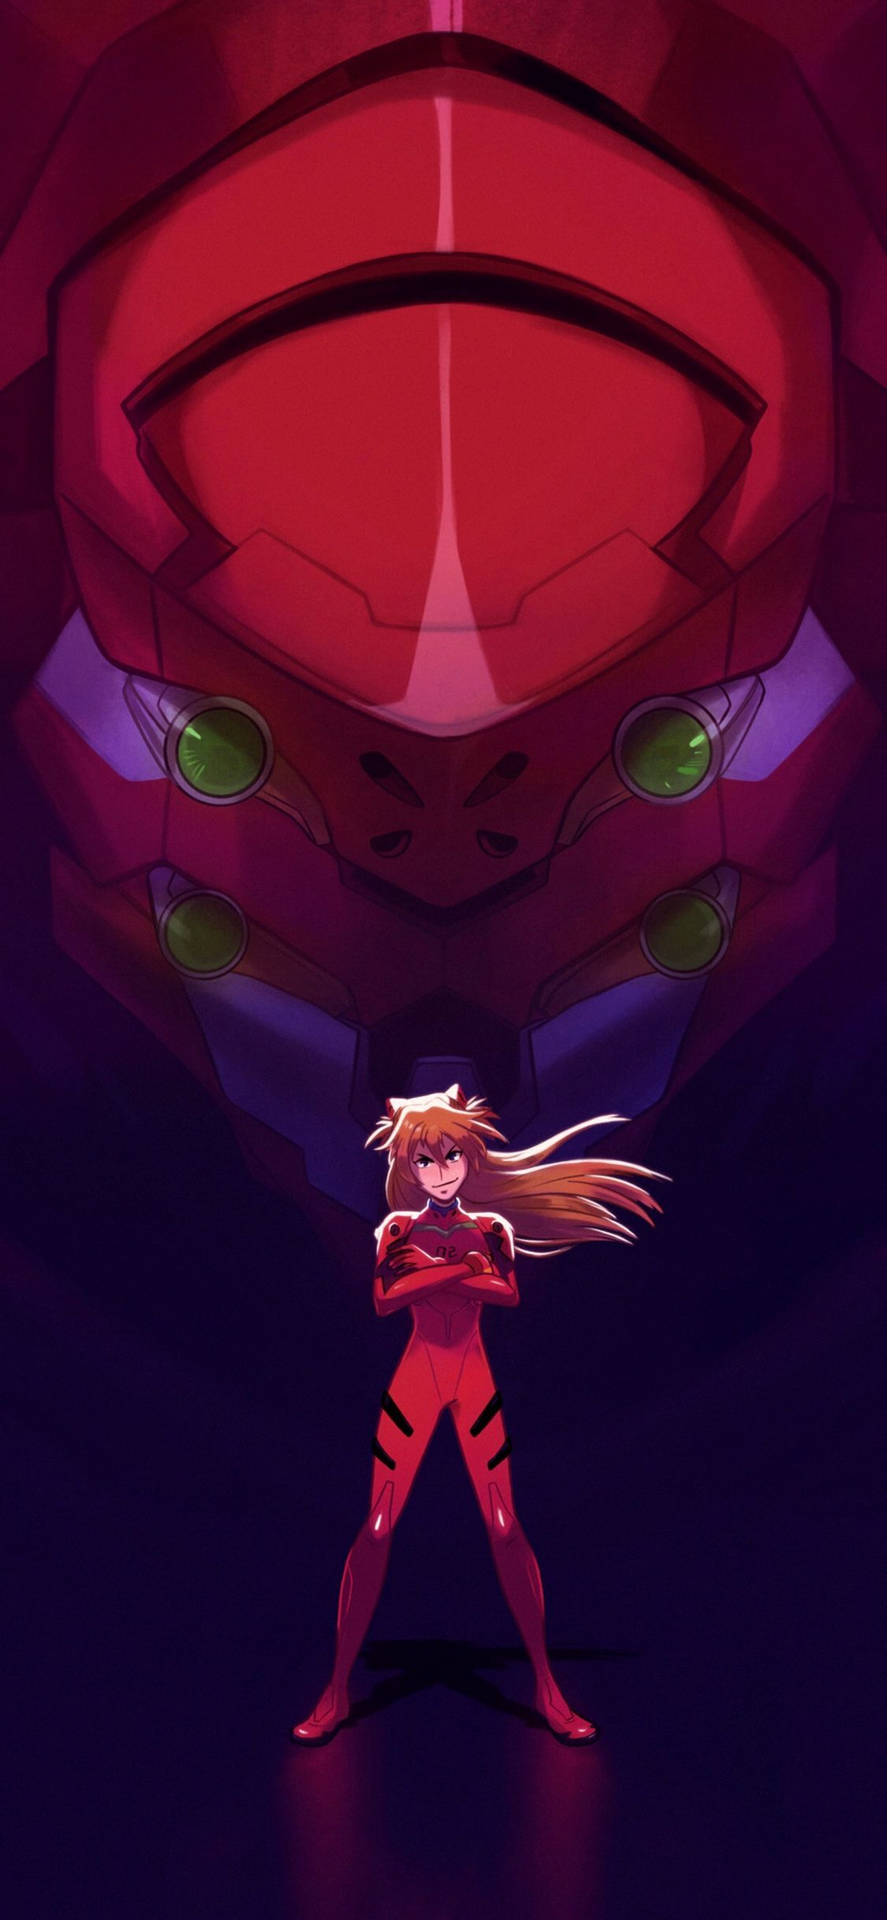 Phone Styled After Popular Anime Series, Evangelion Wallpaper